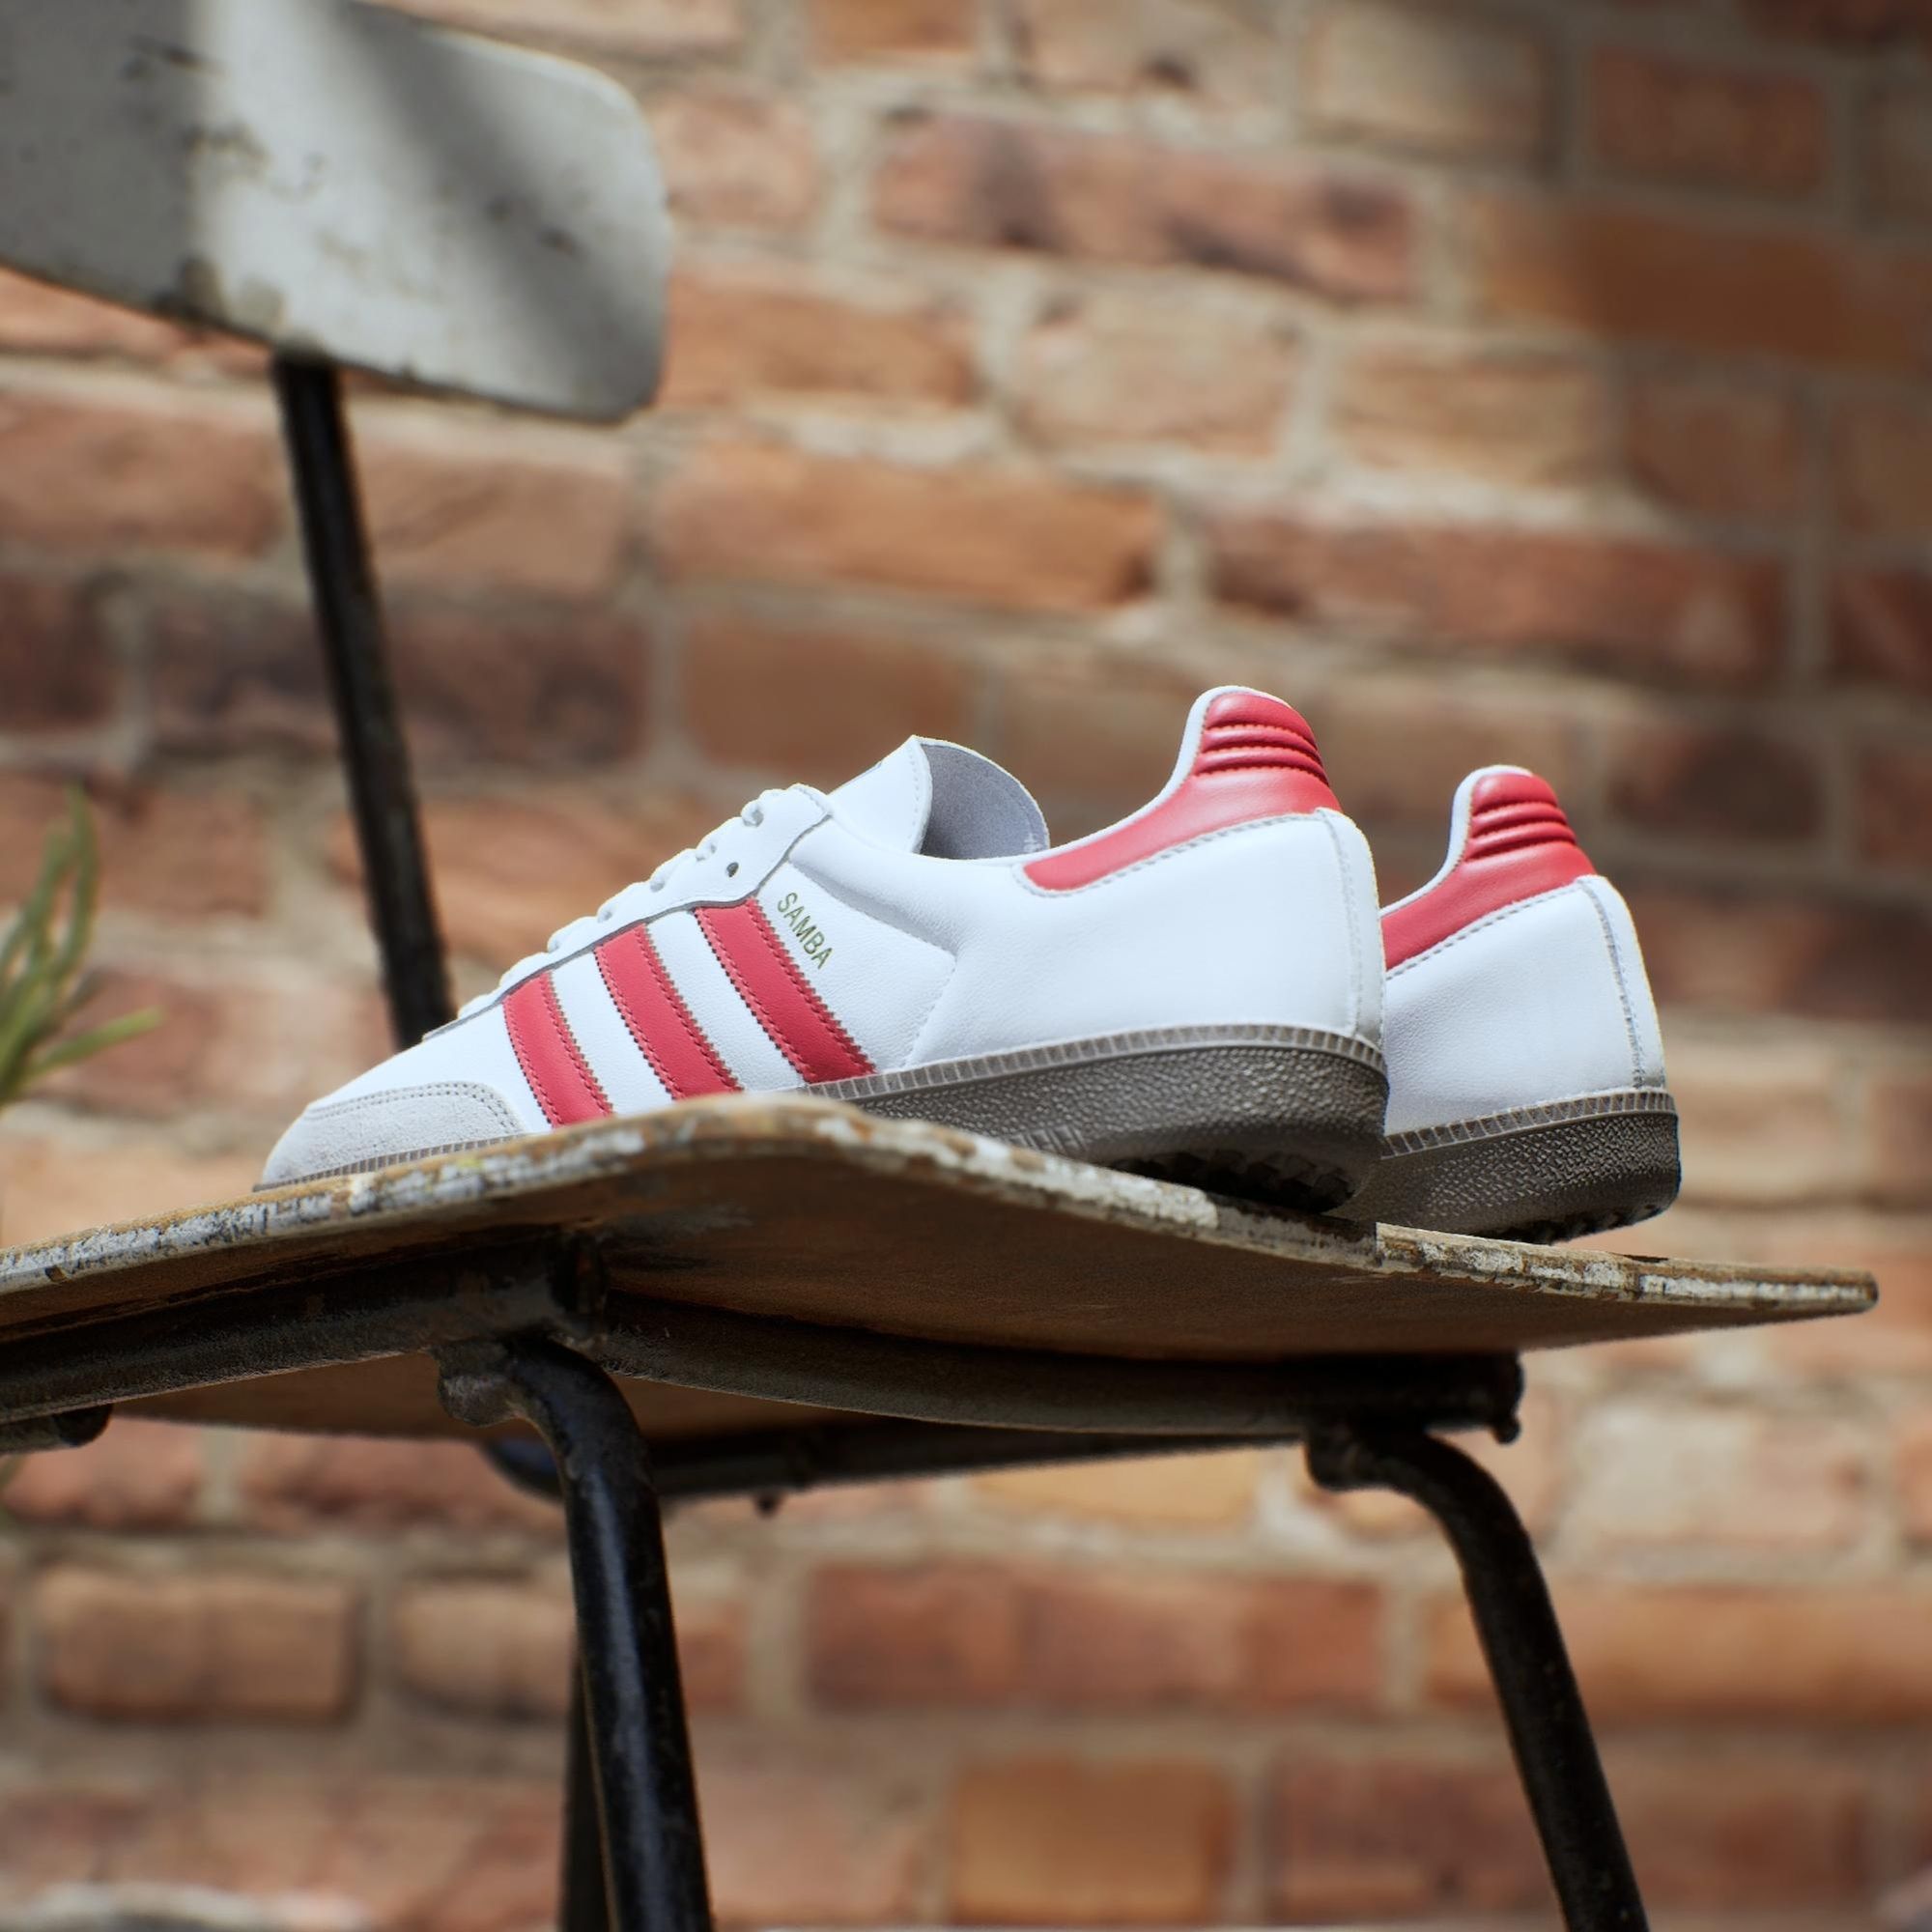 The adidas Samba OG is Available Now in 